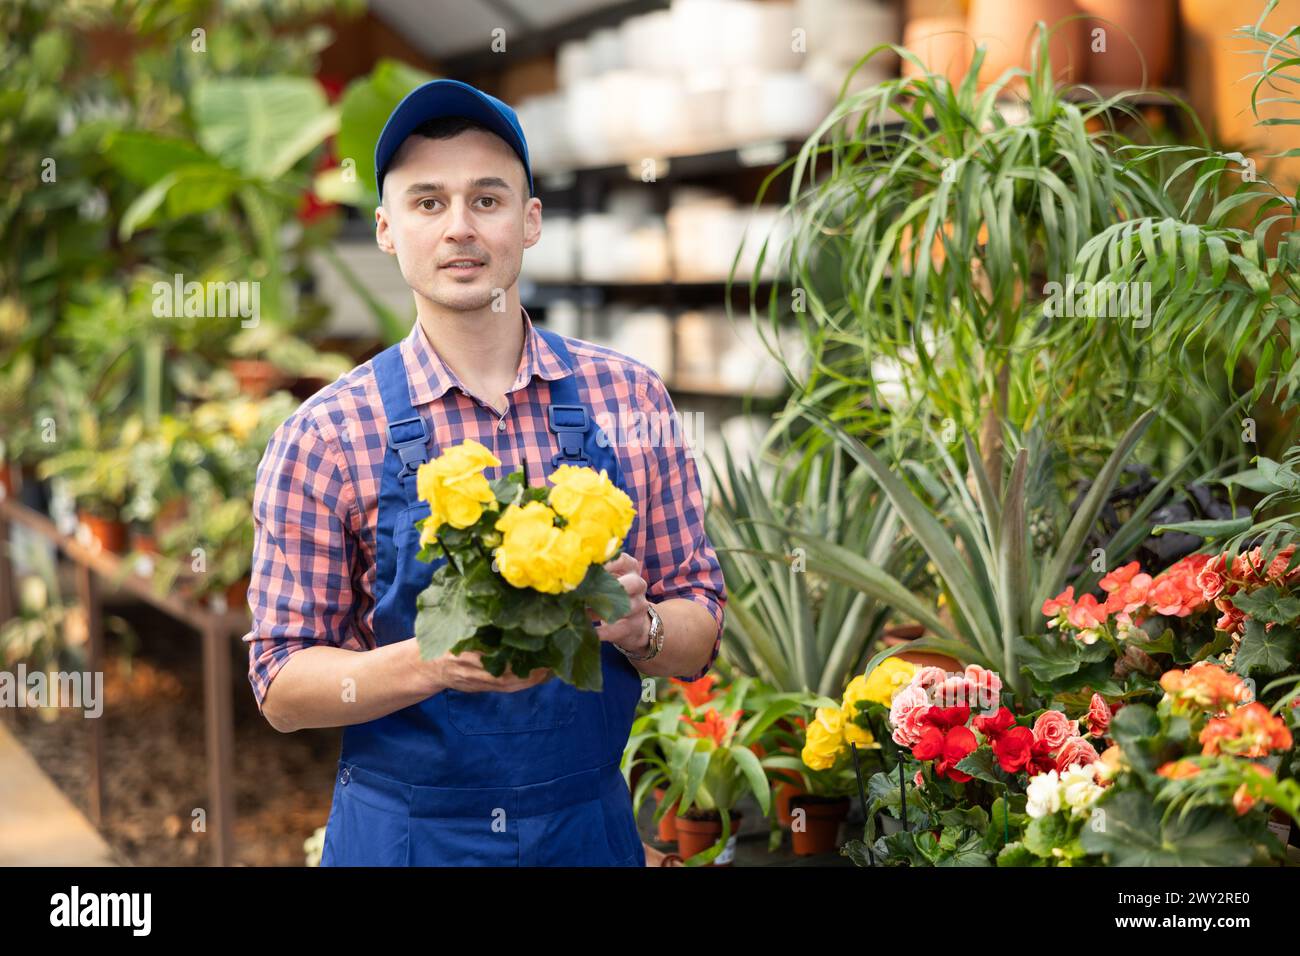 Portrait of male greenhouse worker holding a yellow begonia flower in hands Stock Photo